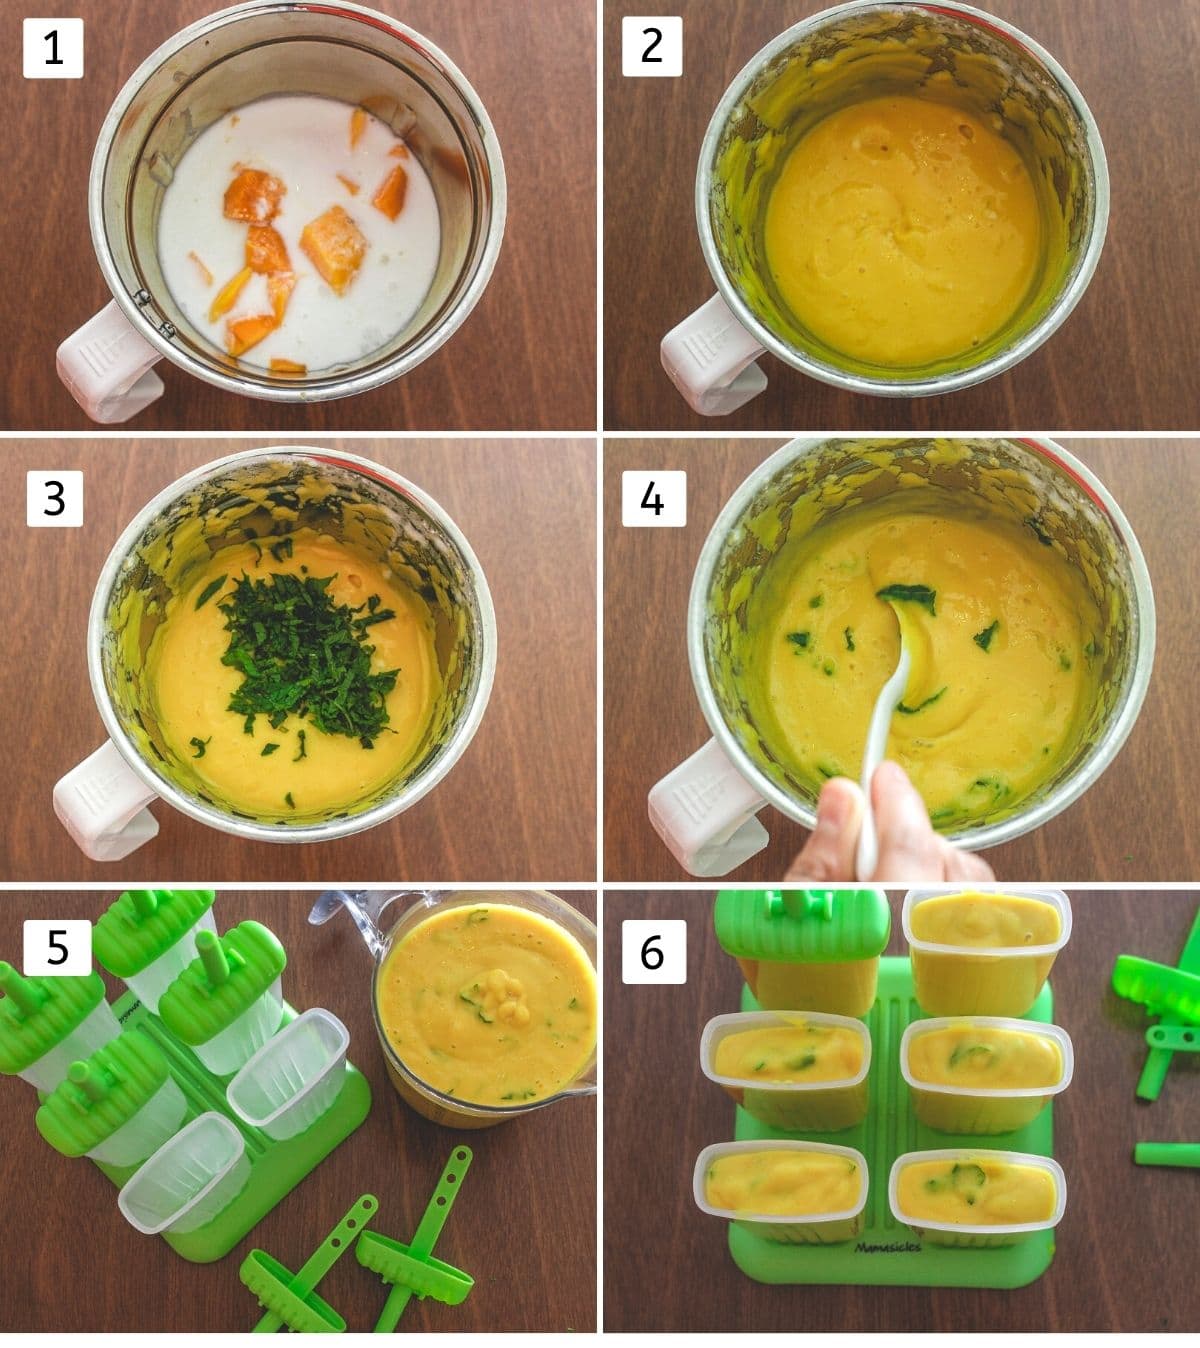 Collage of 6 images showing grinding popsicle mixture, stirring mint leaves, adding into molds.